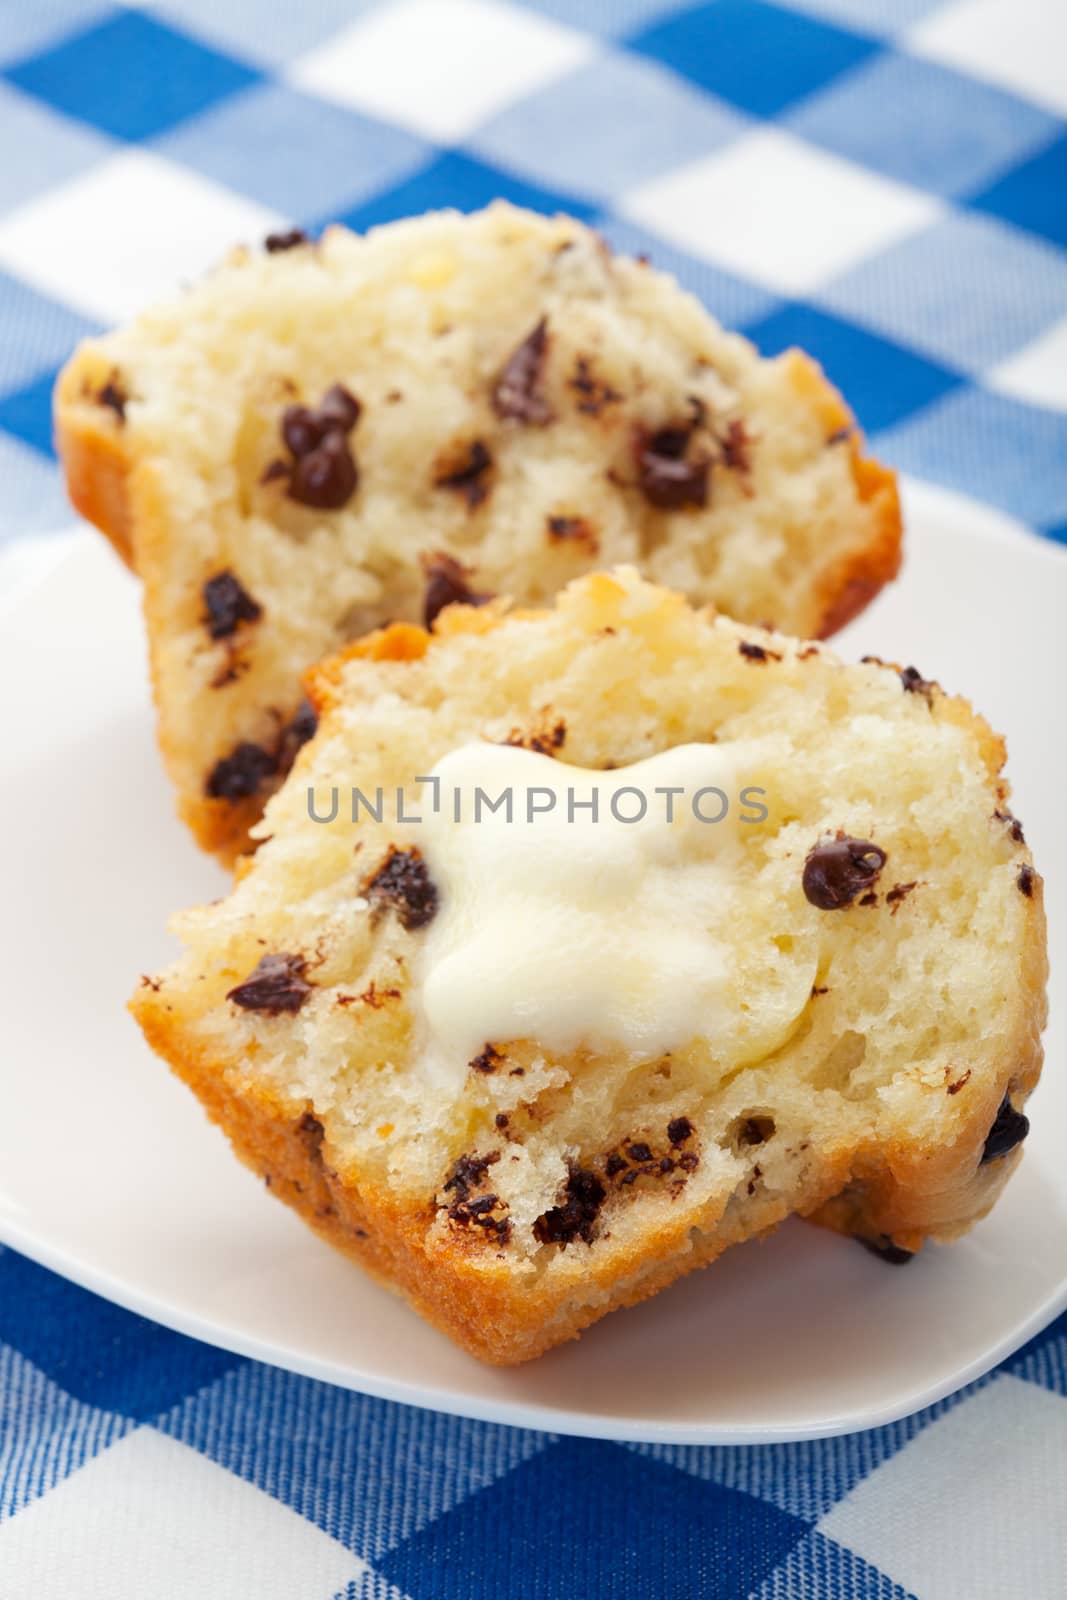 A warm, freshly baked, chocolate chip muffin, with melting butter.